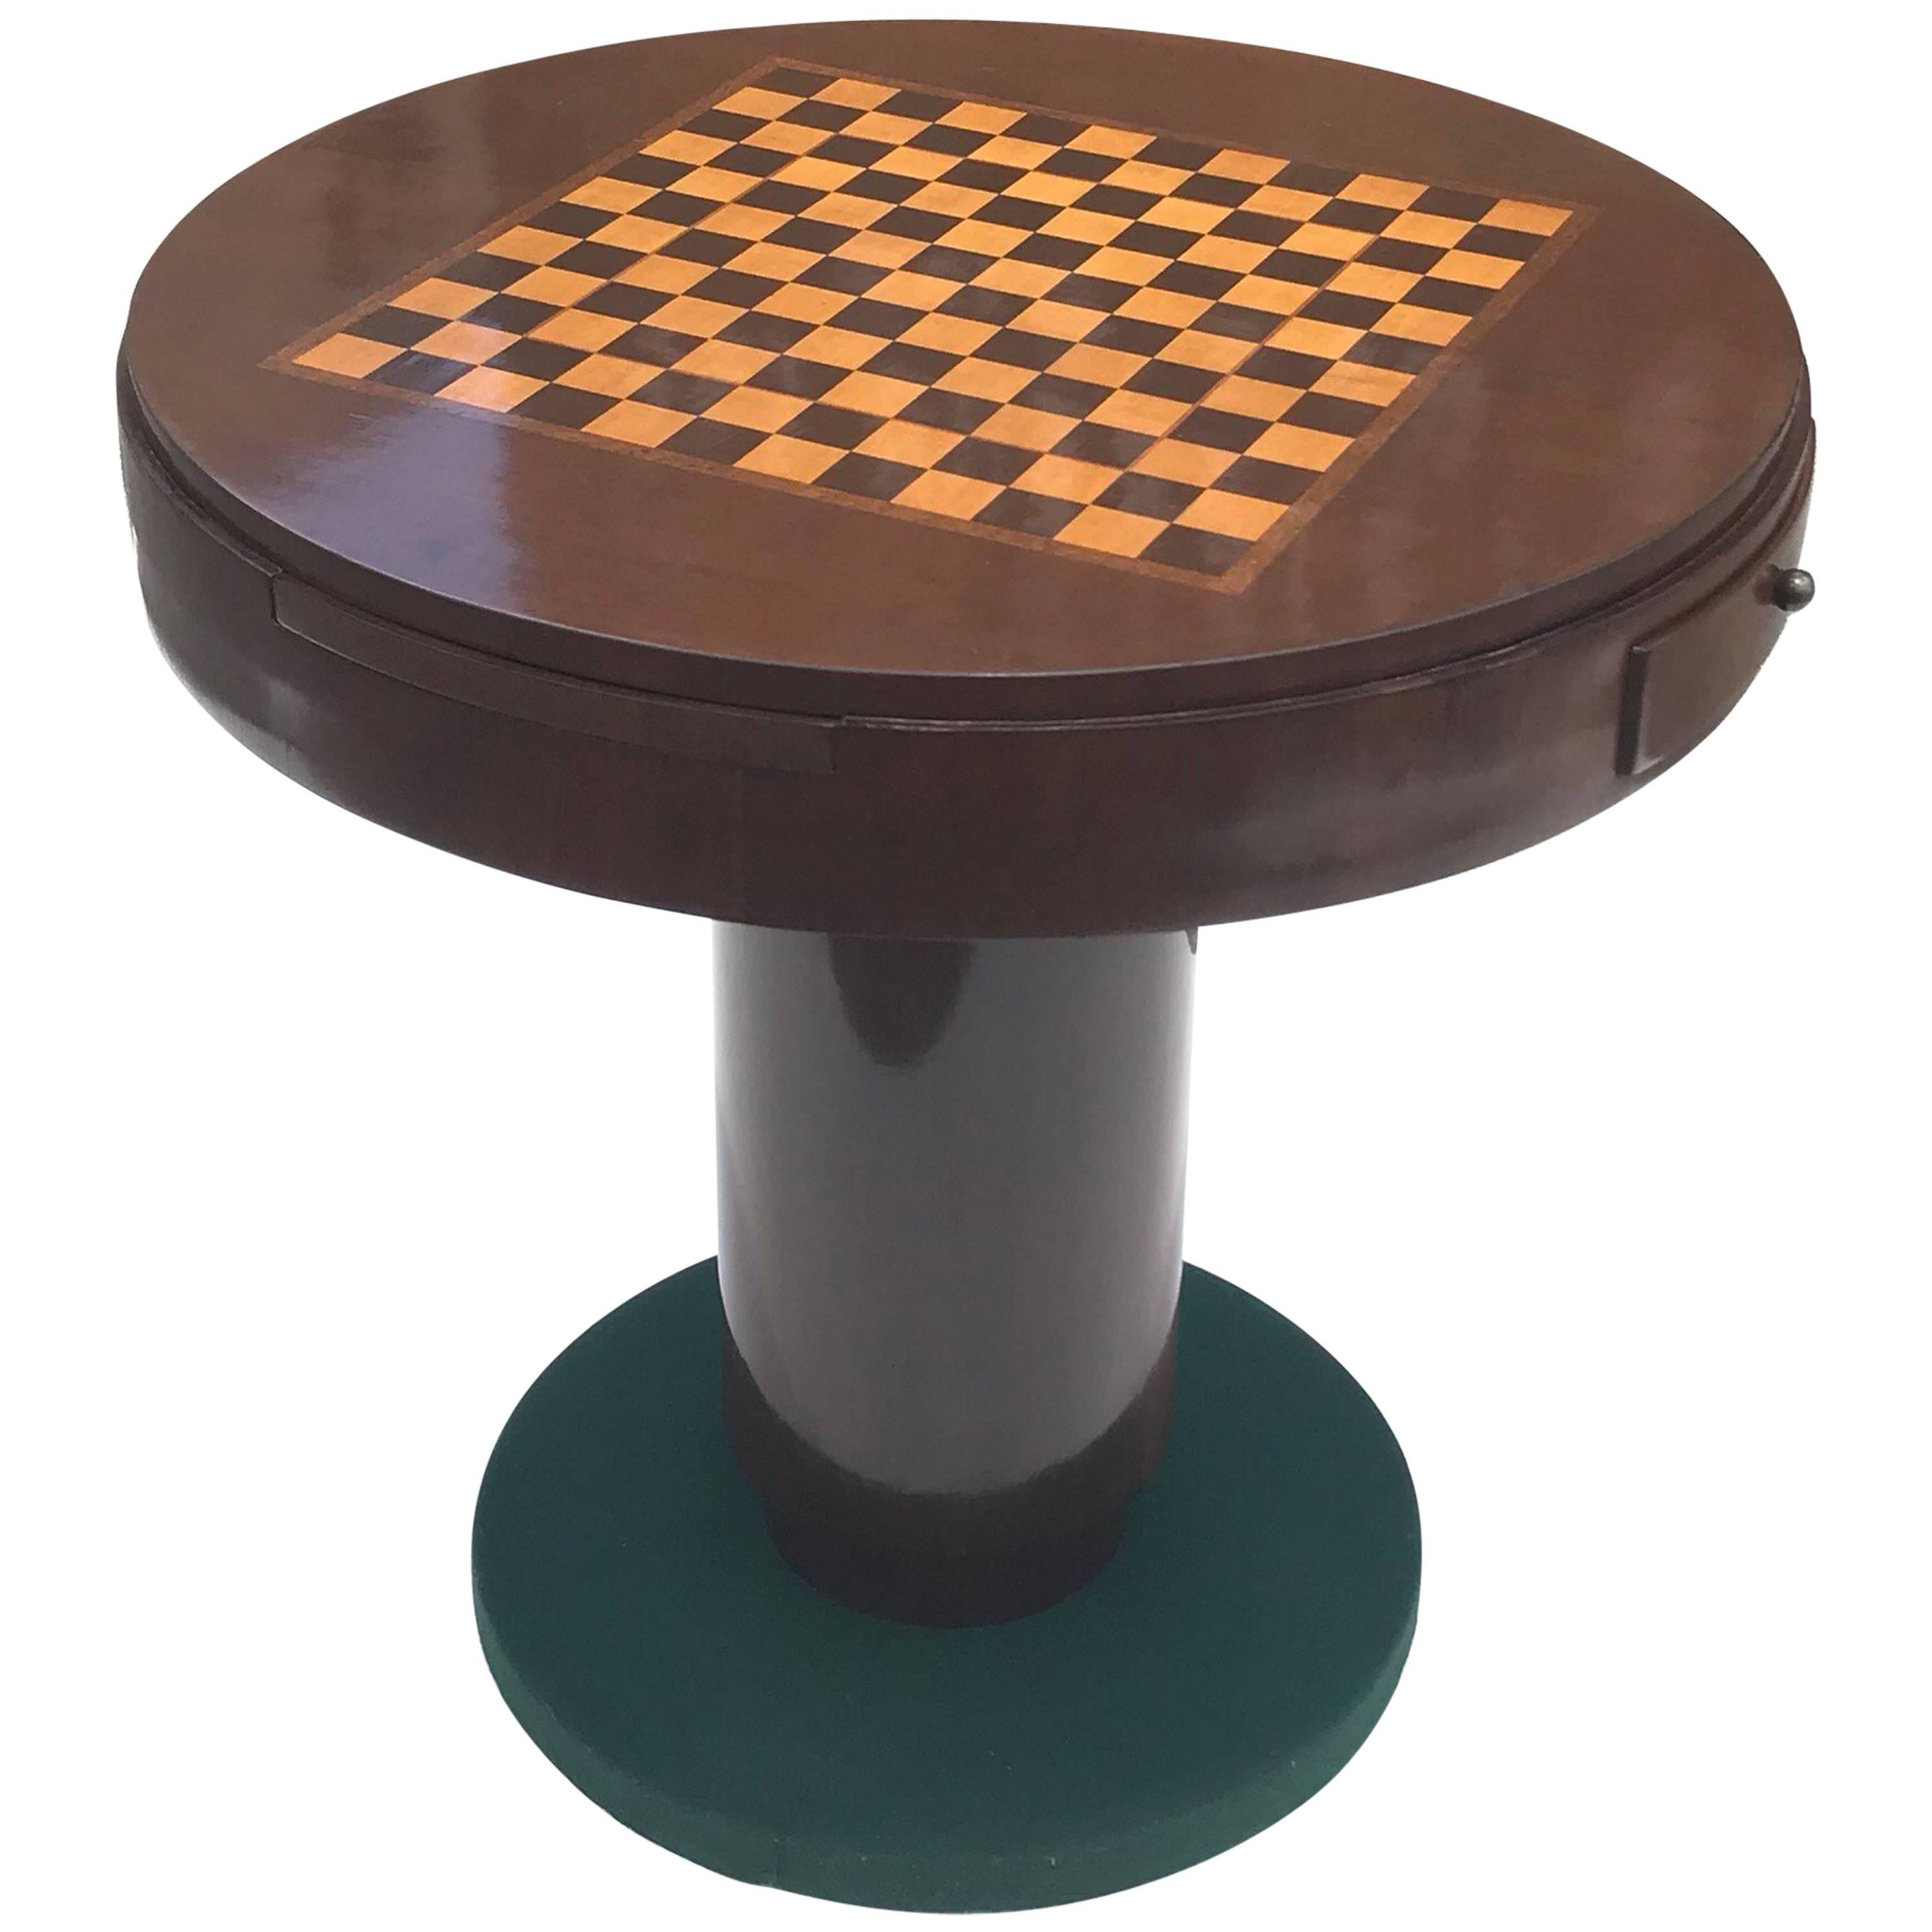 Classic French Art Deco Rosewood Round Game Table, circa 1940s